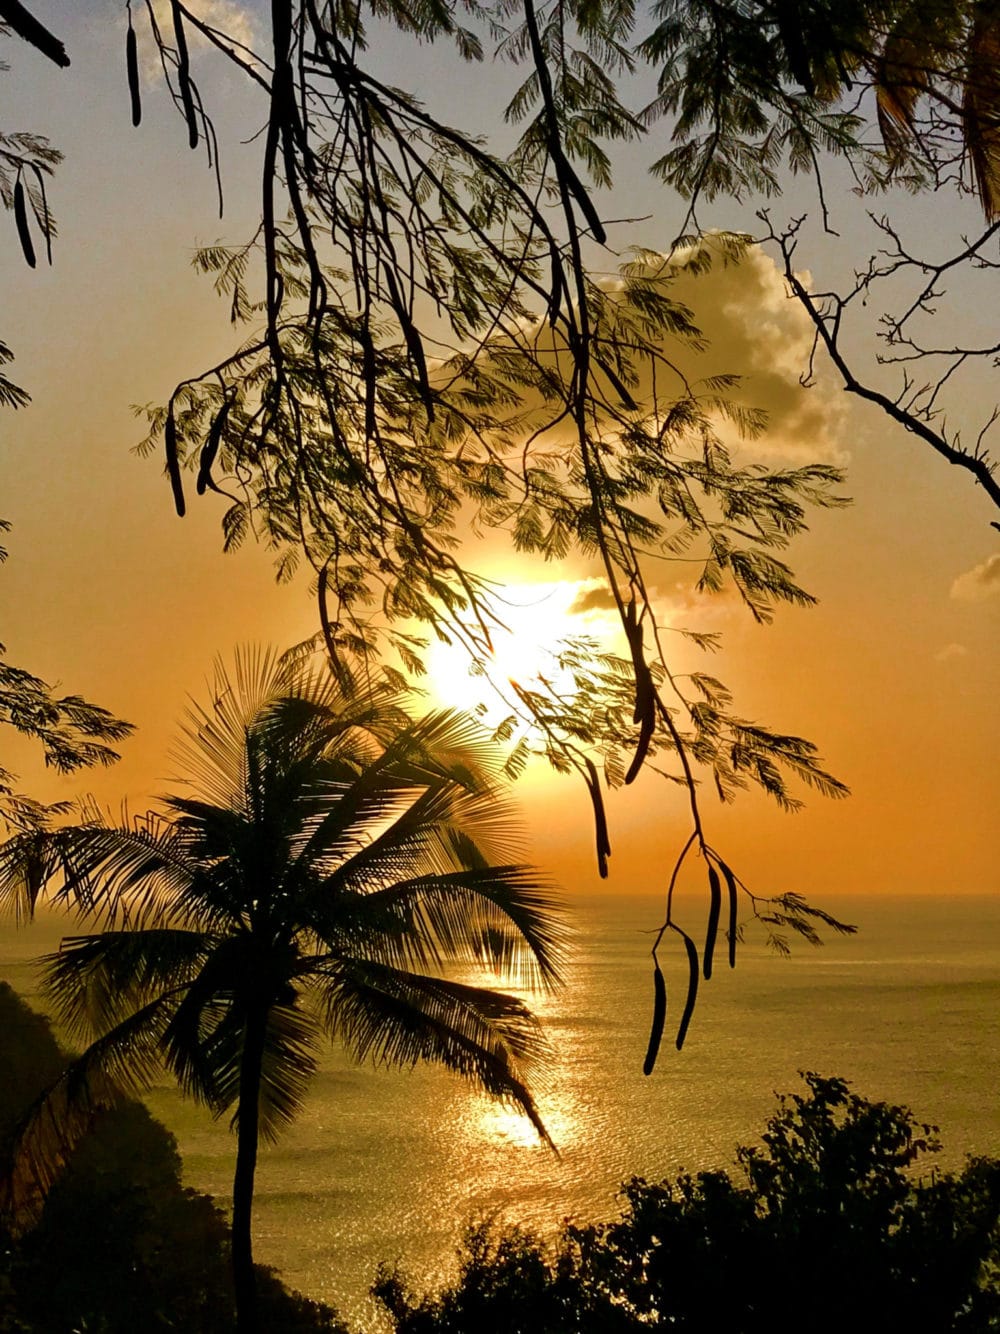 Sunset in St. Lucia